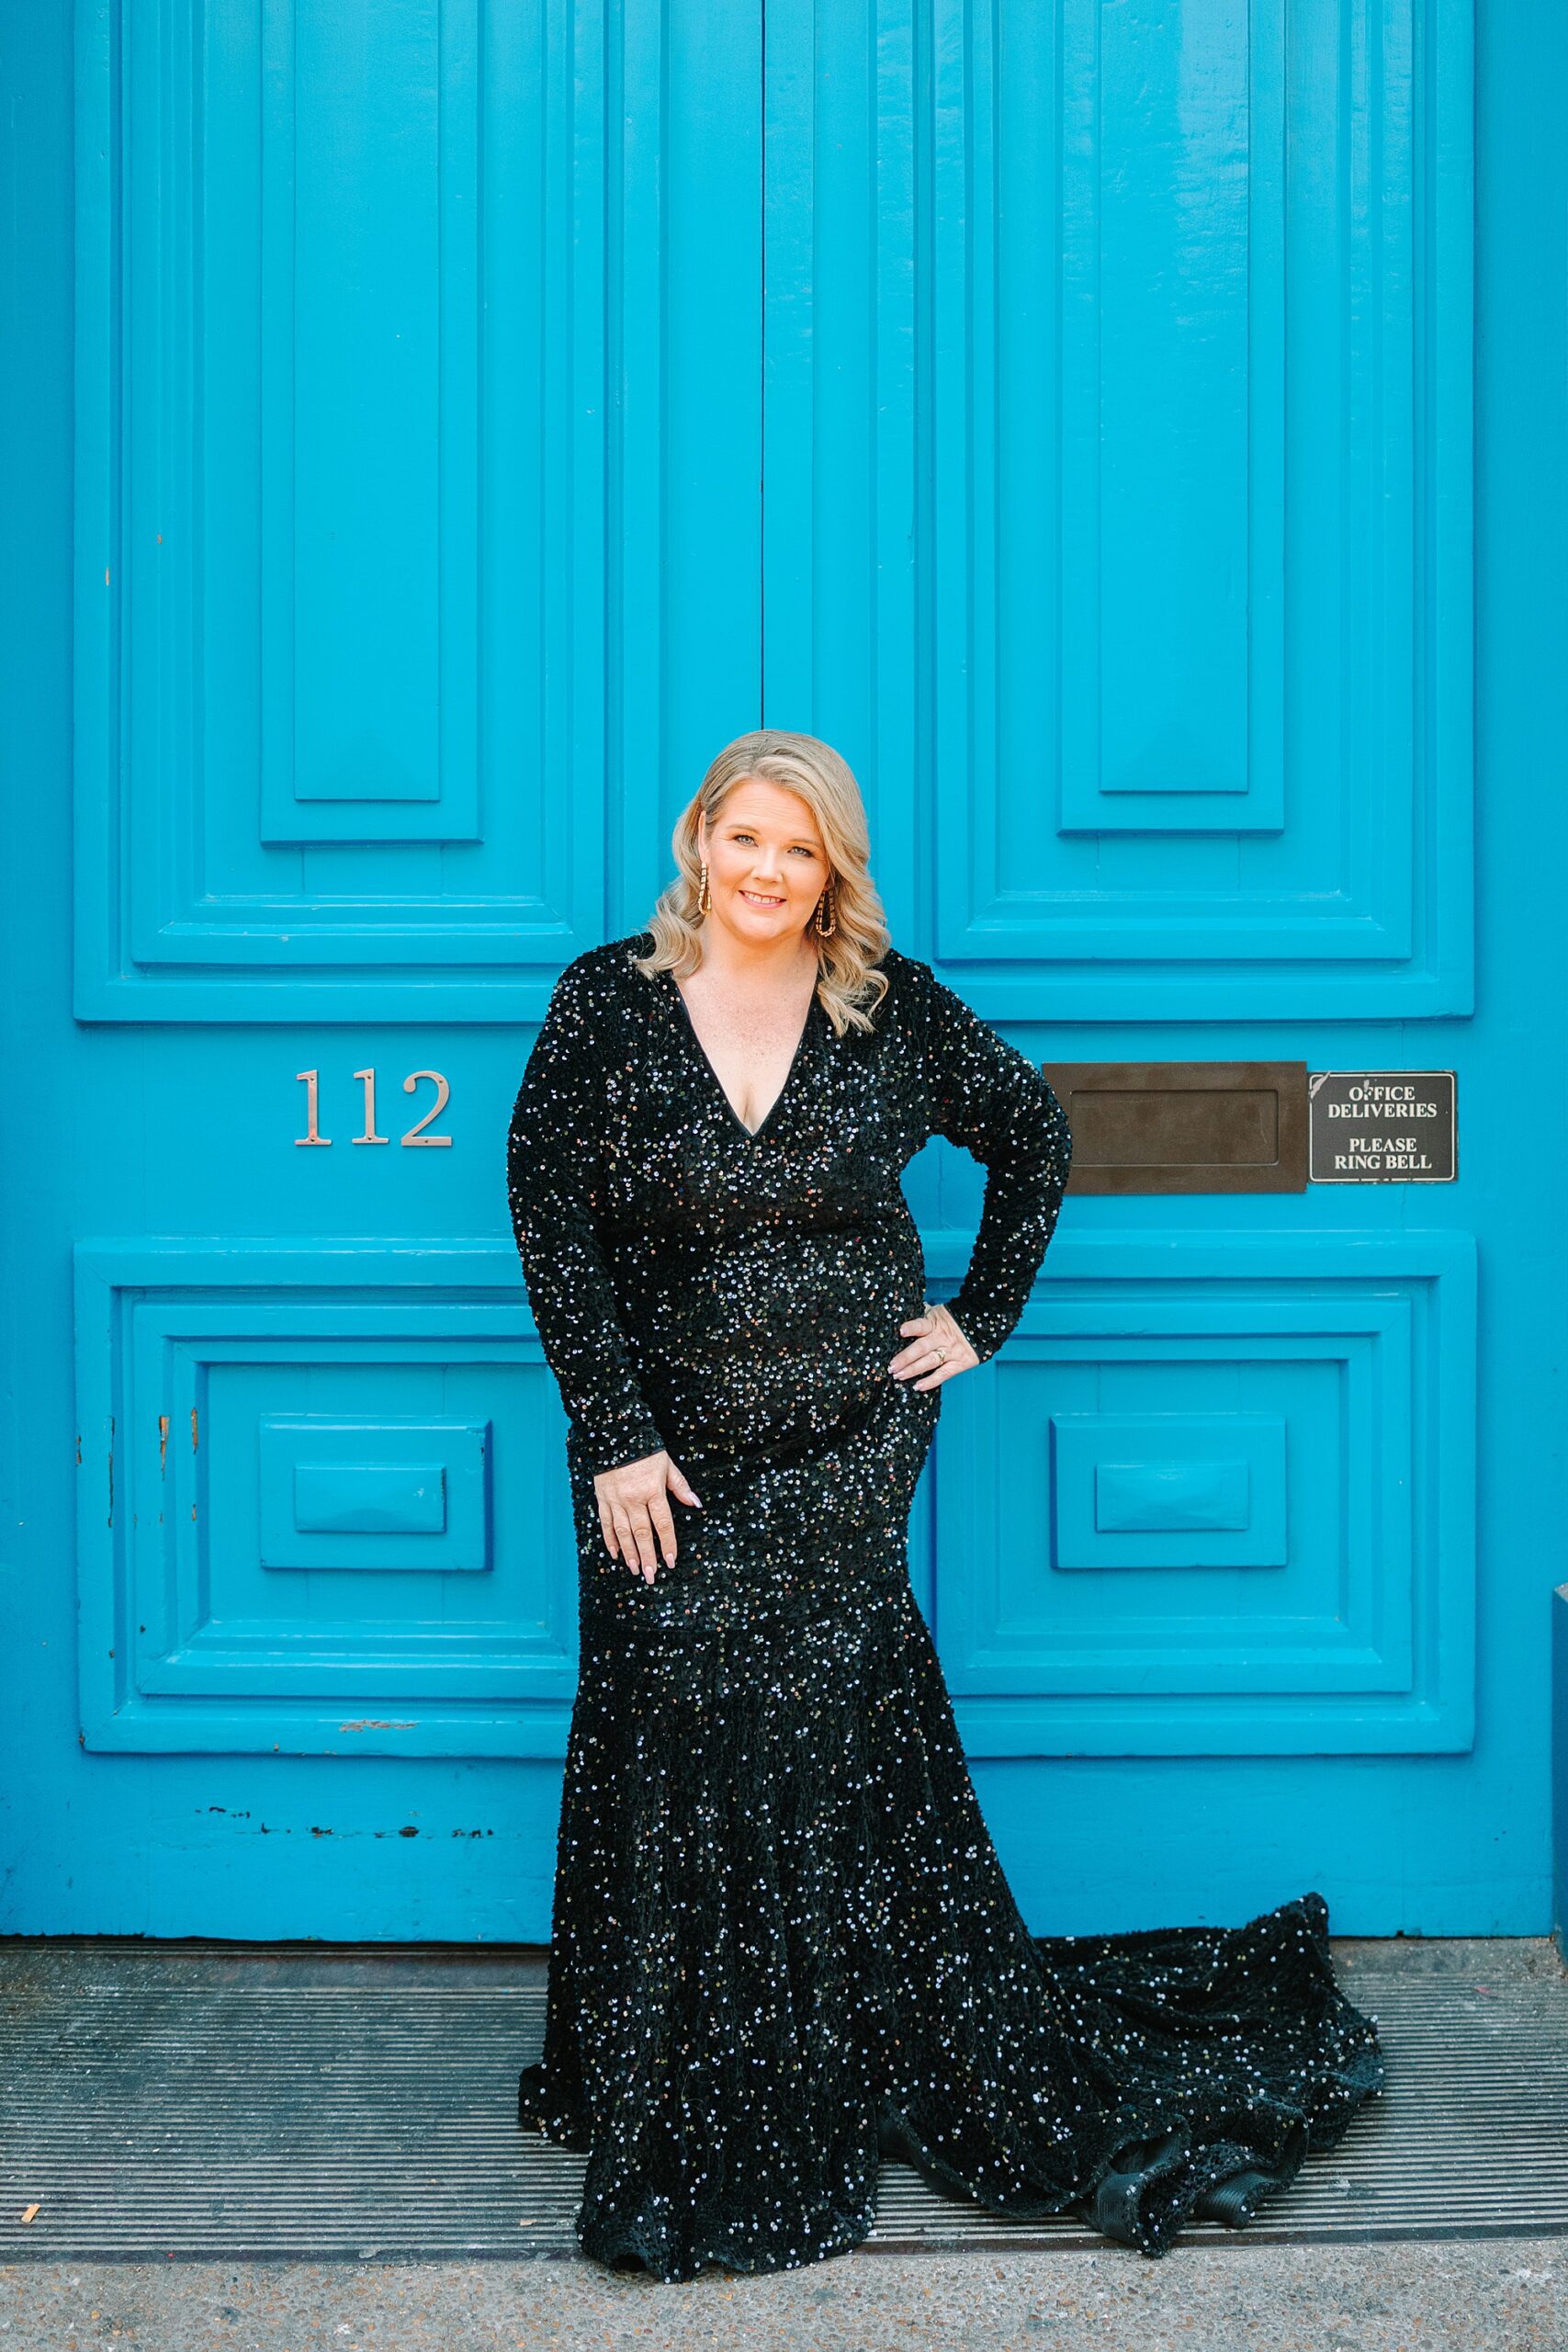 woman in black dress smiles in front of large blue doors on Broadway in Downtown Nashville